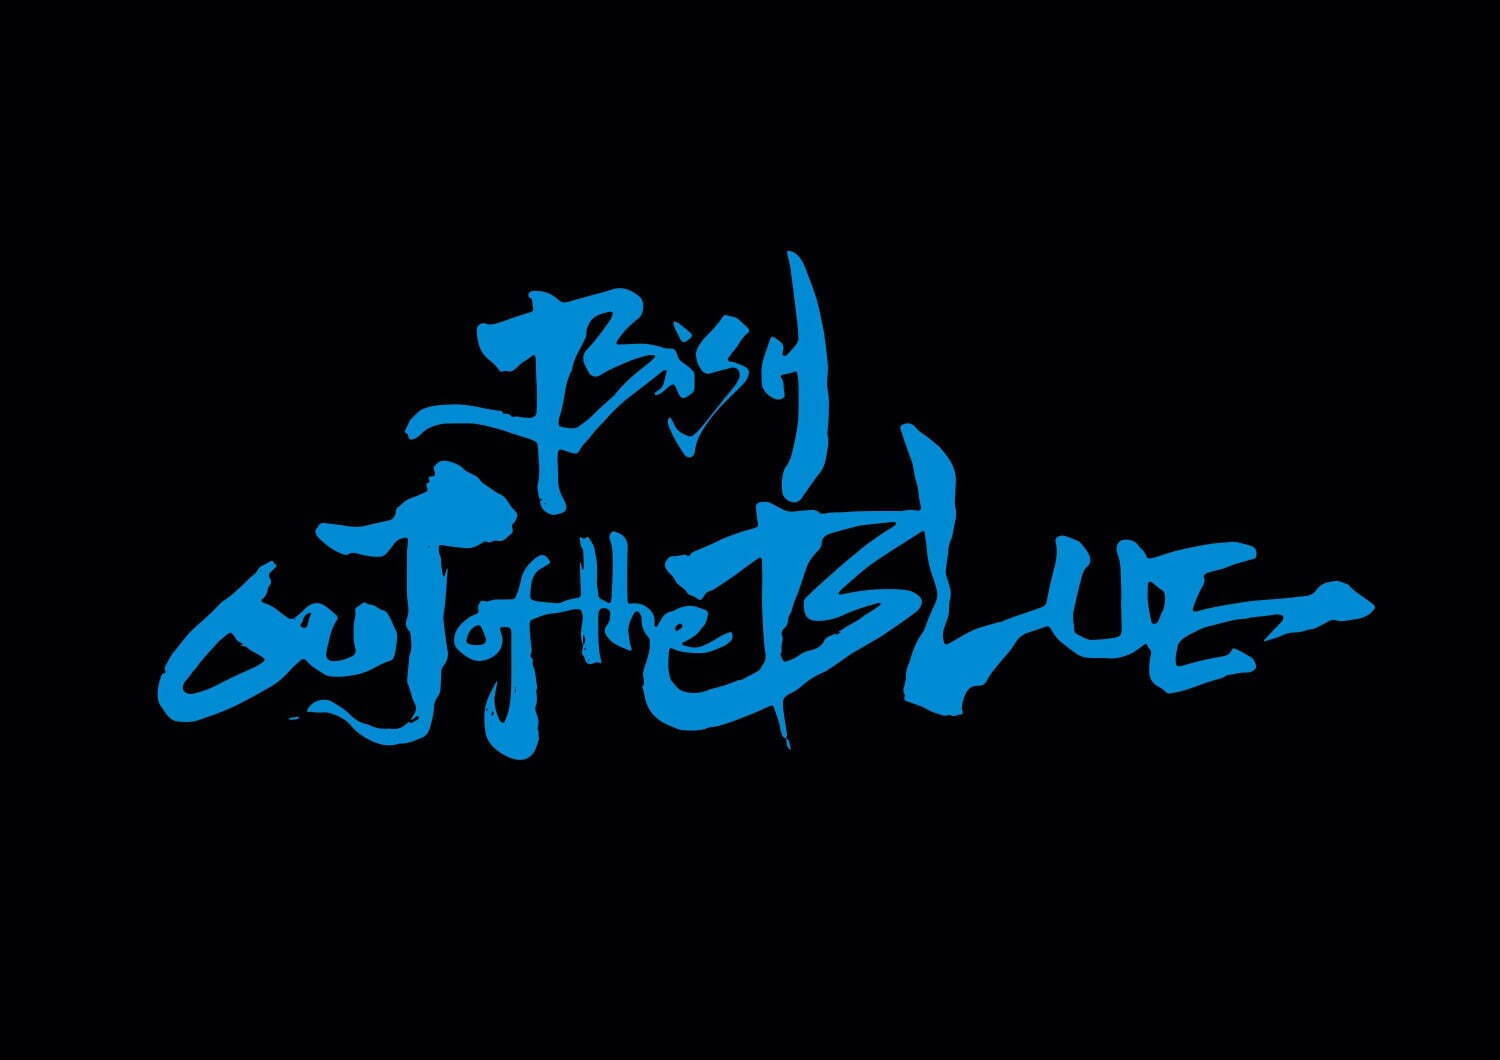 BiSH OUT of the BLUE 富士急ハイランド｜写真2